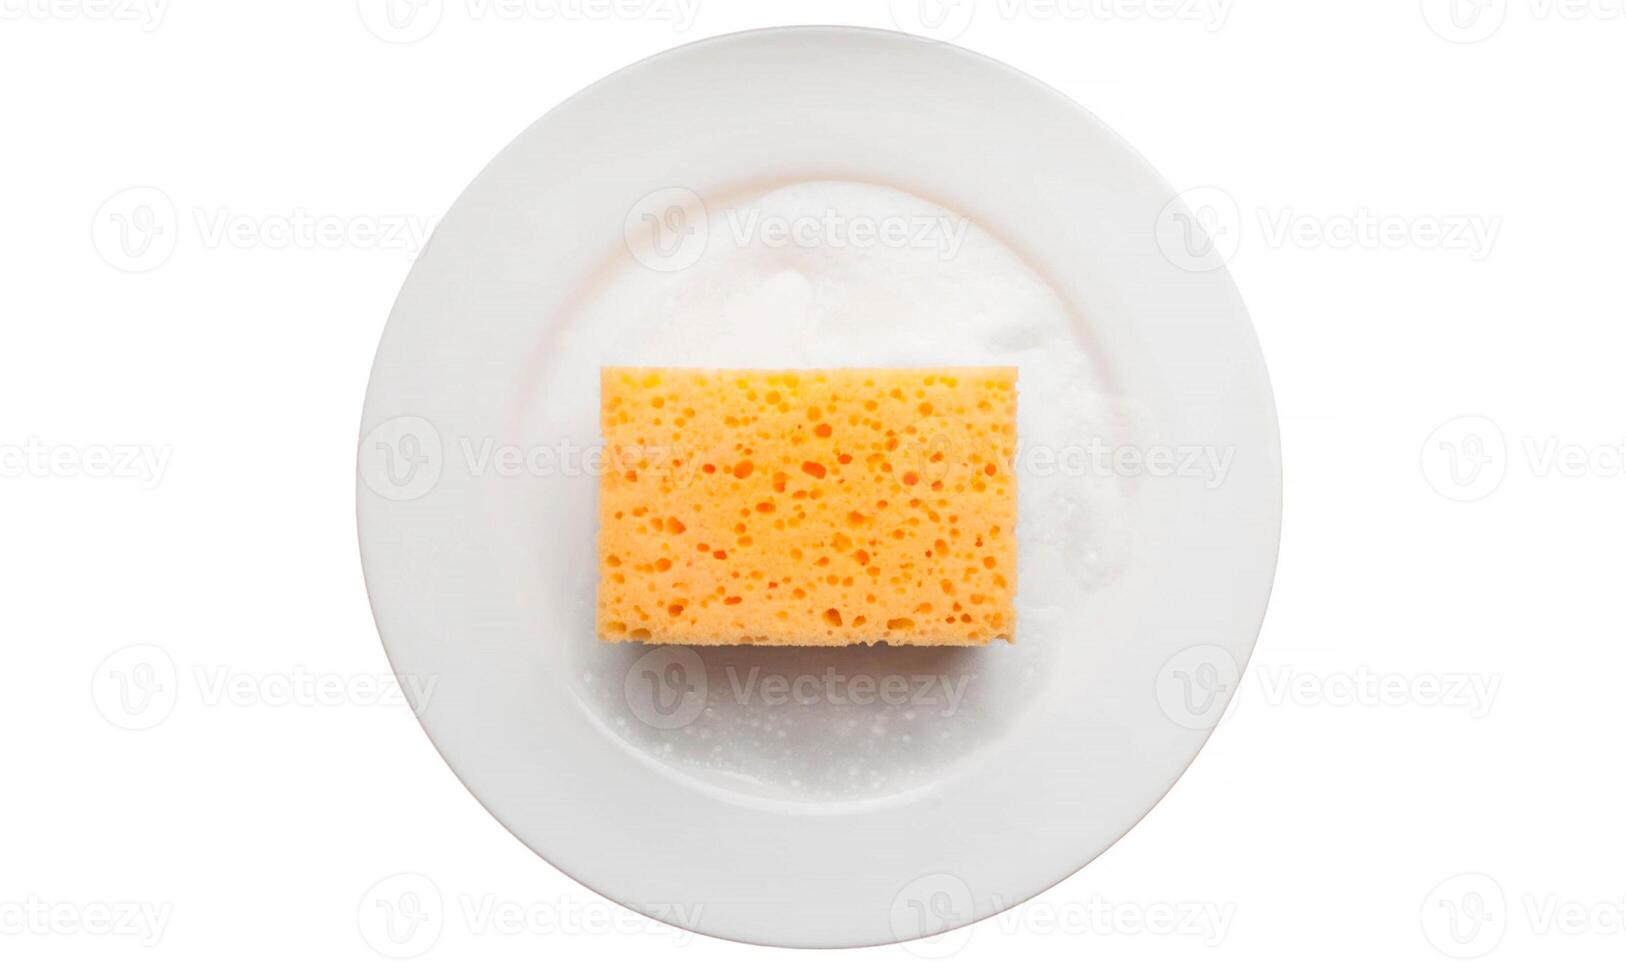 Cleaning yellow sponge on a white plate with soap foam isolated on a white background. Using a scrub sponge to scrub and wash food stains and dirt on white dishes after meals. Cleaning concept. photo